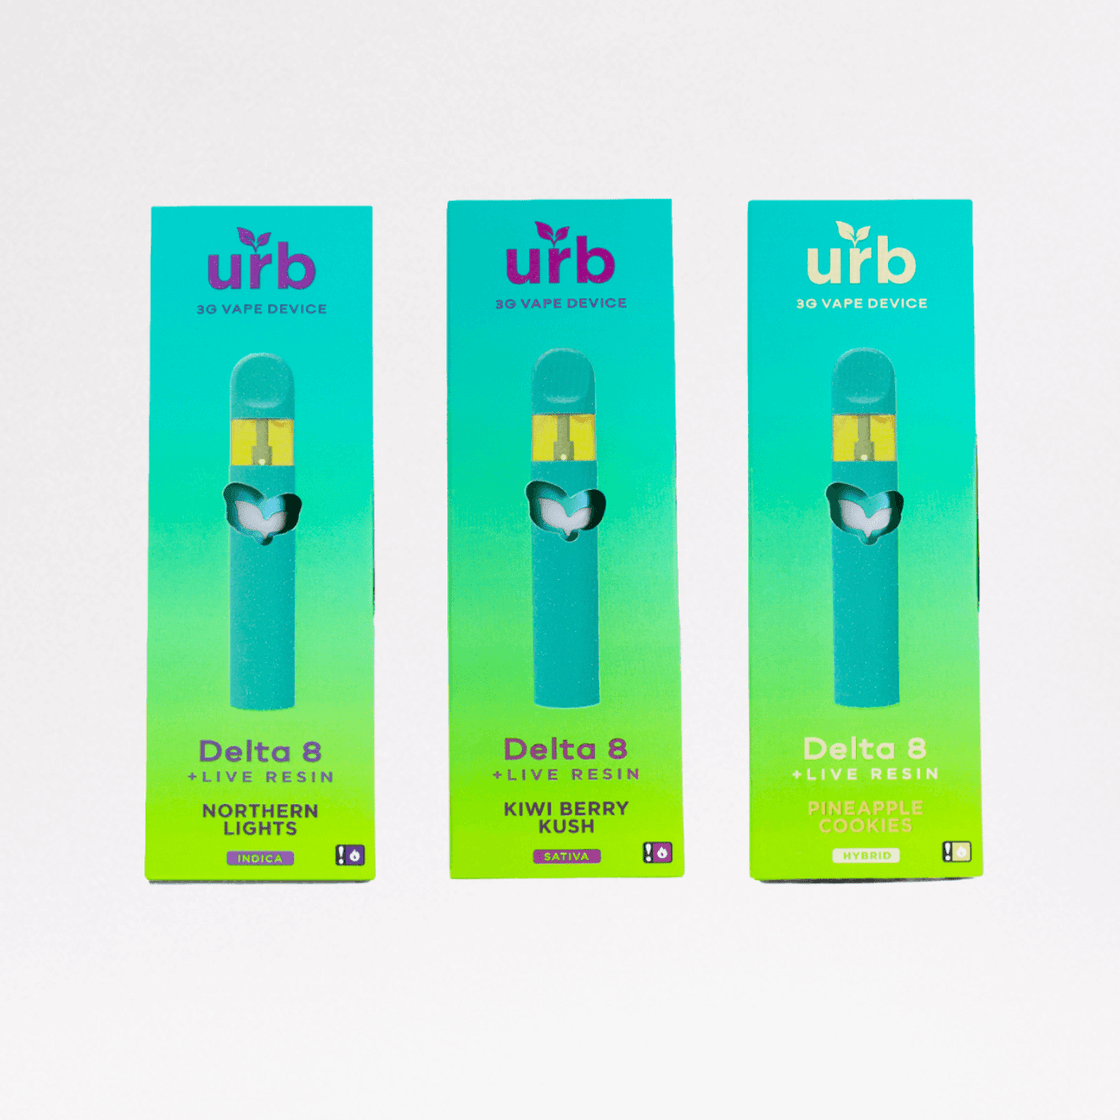 URB DELTA 8 + LIVE RESIN 3GM DISPOSABLE